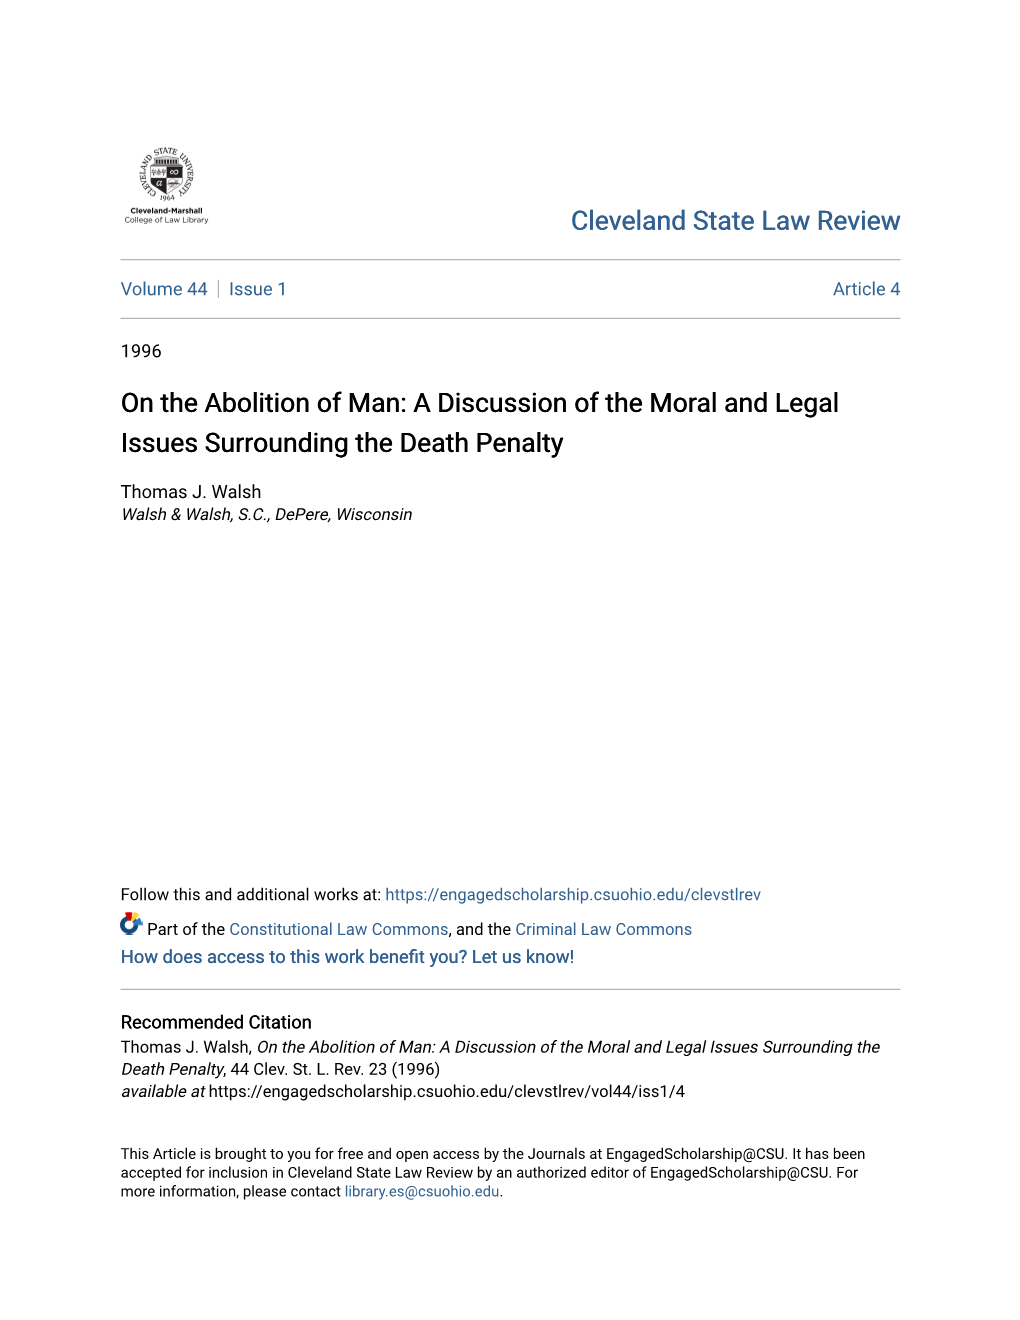 On the Abolition of Man: a Discussion of the Moral and Legal Issues Surrounding the Death Penalty